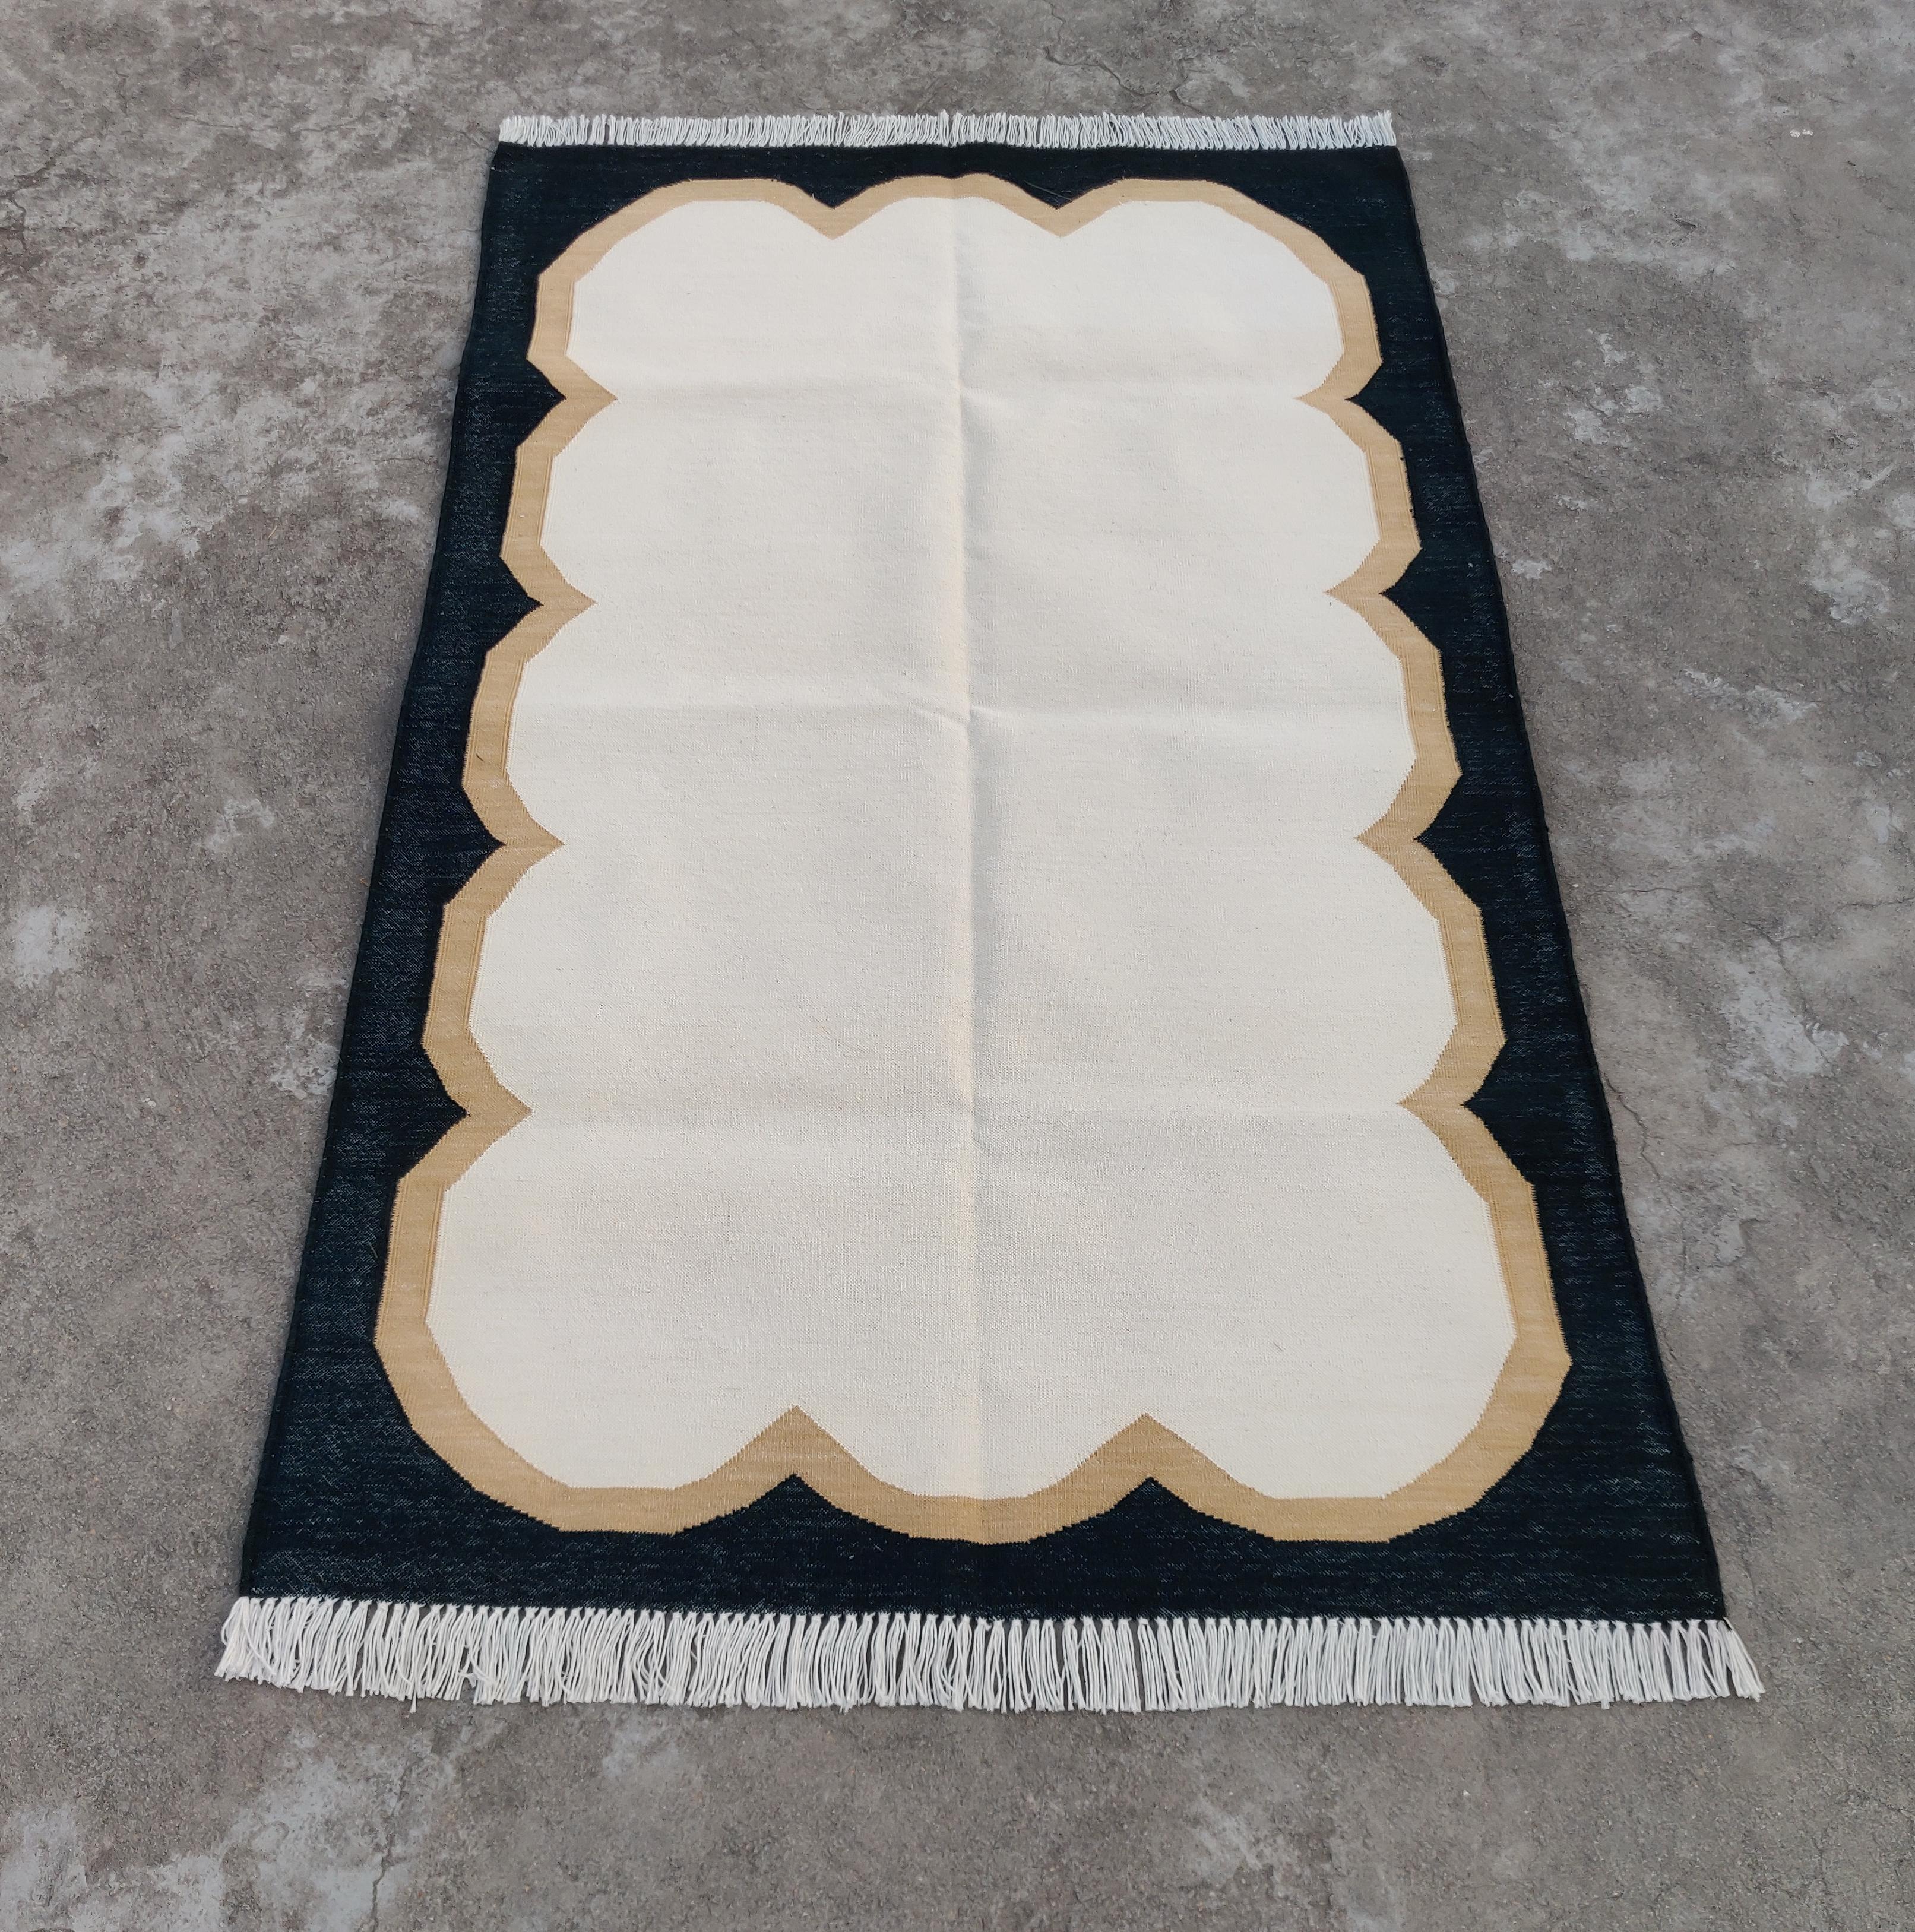 Handmade Cotton Area Flat Weave Rug, 3x5 Cream And Black Scallop Indian Dhurrie In New Condition For Sale In Jaipur, IN